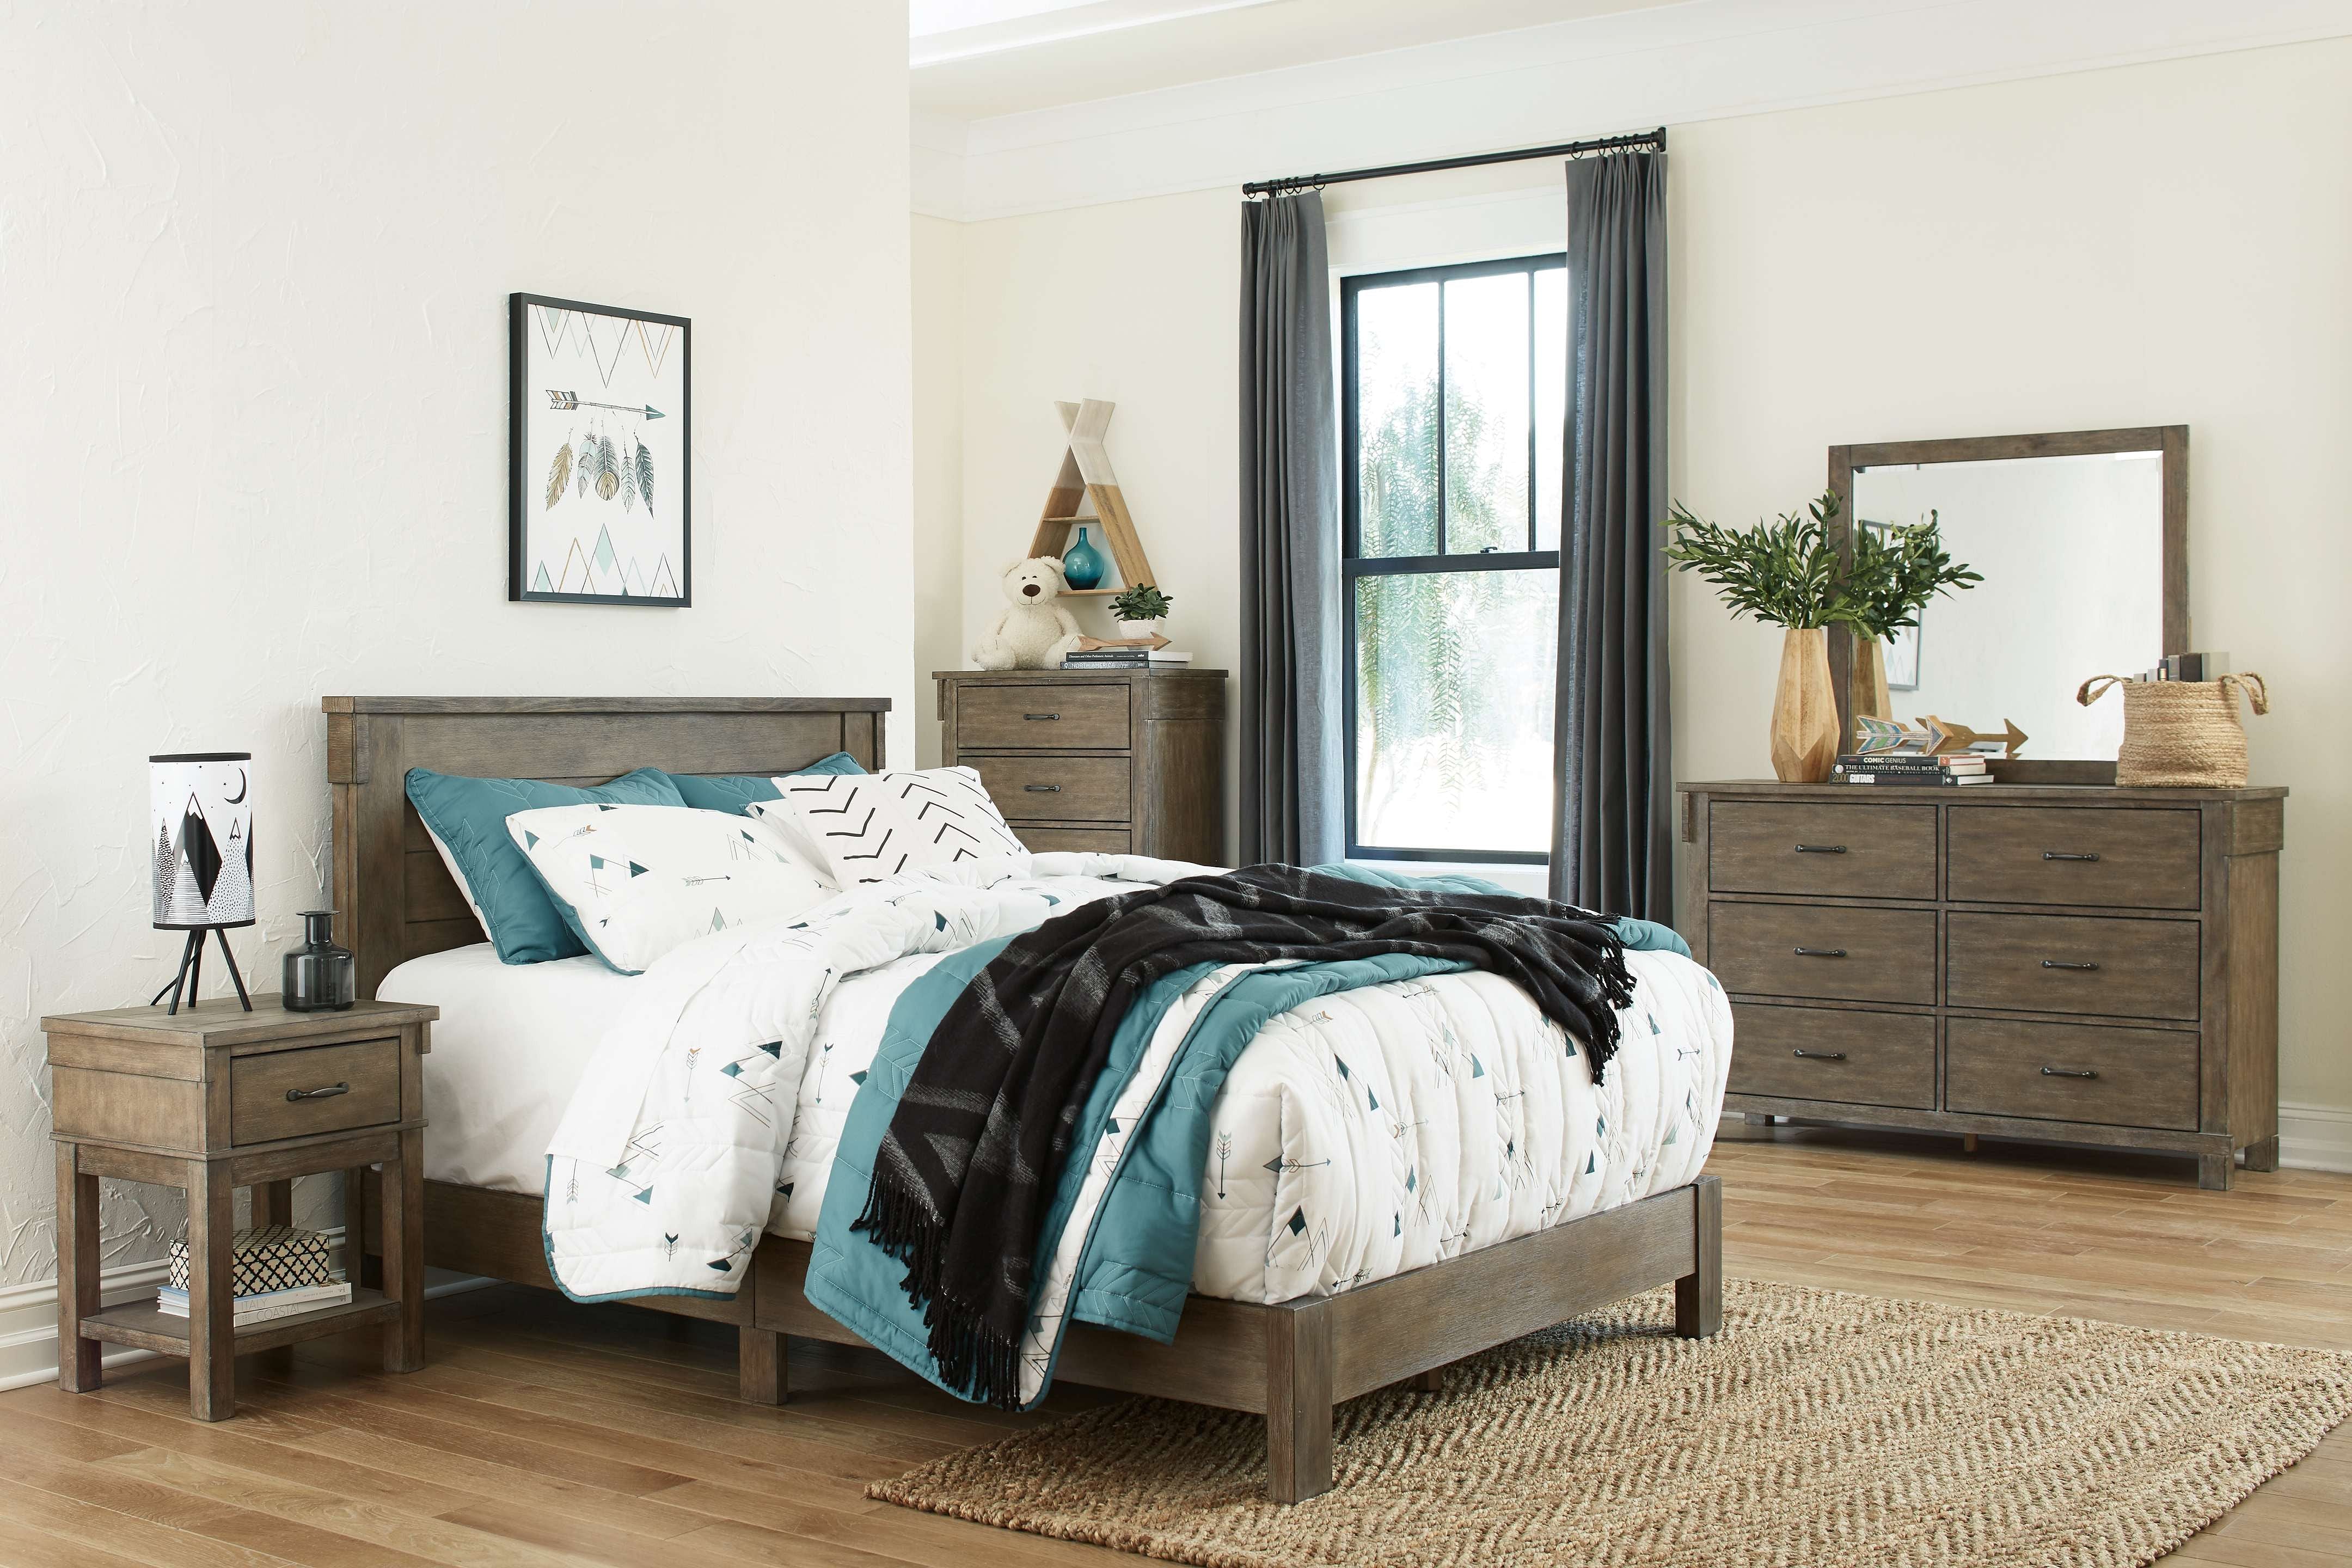 Bedroom Bedroom Sets Ashley Bedroom 3 Piece Full Panel Bed Set B436-31-36-72 at iStyle Furniture Store